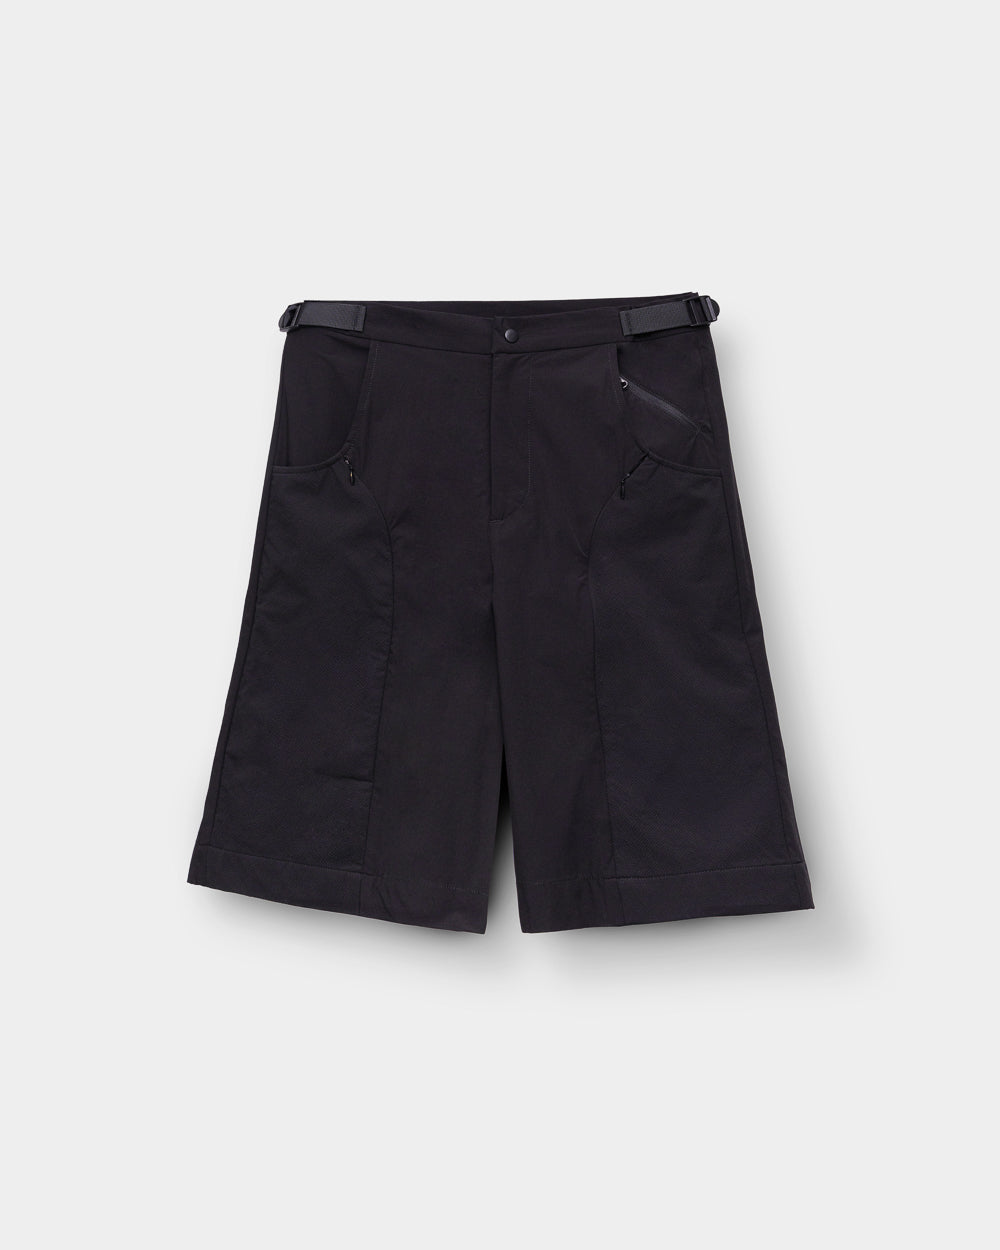 TEC_TYPE 1 CARRIAGE SHORTS